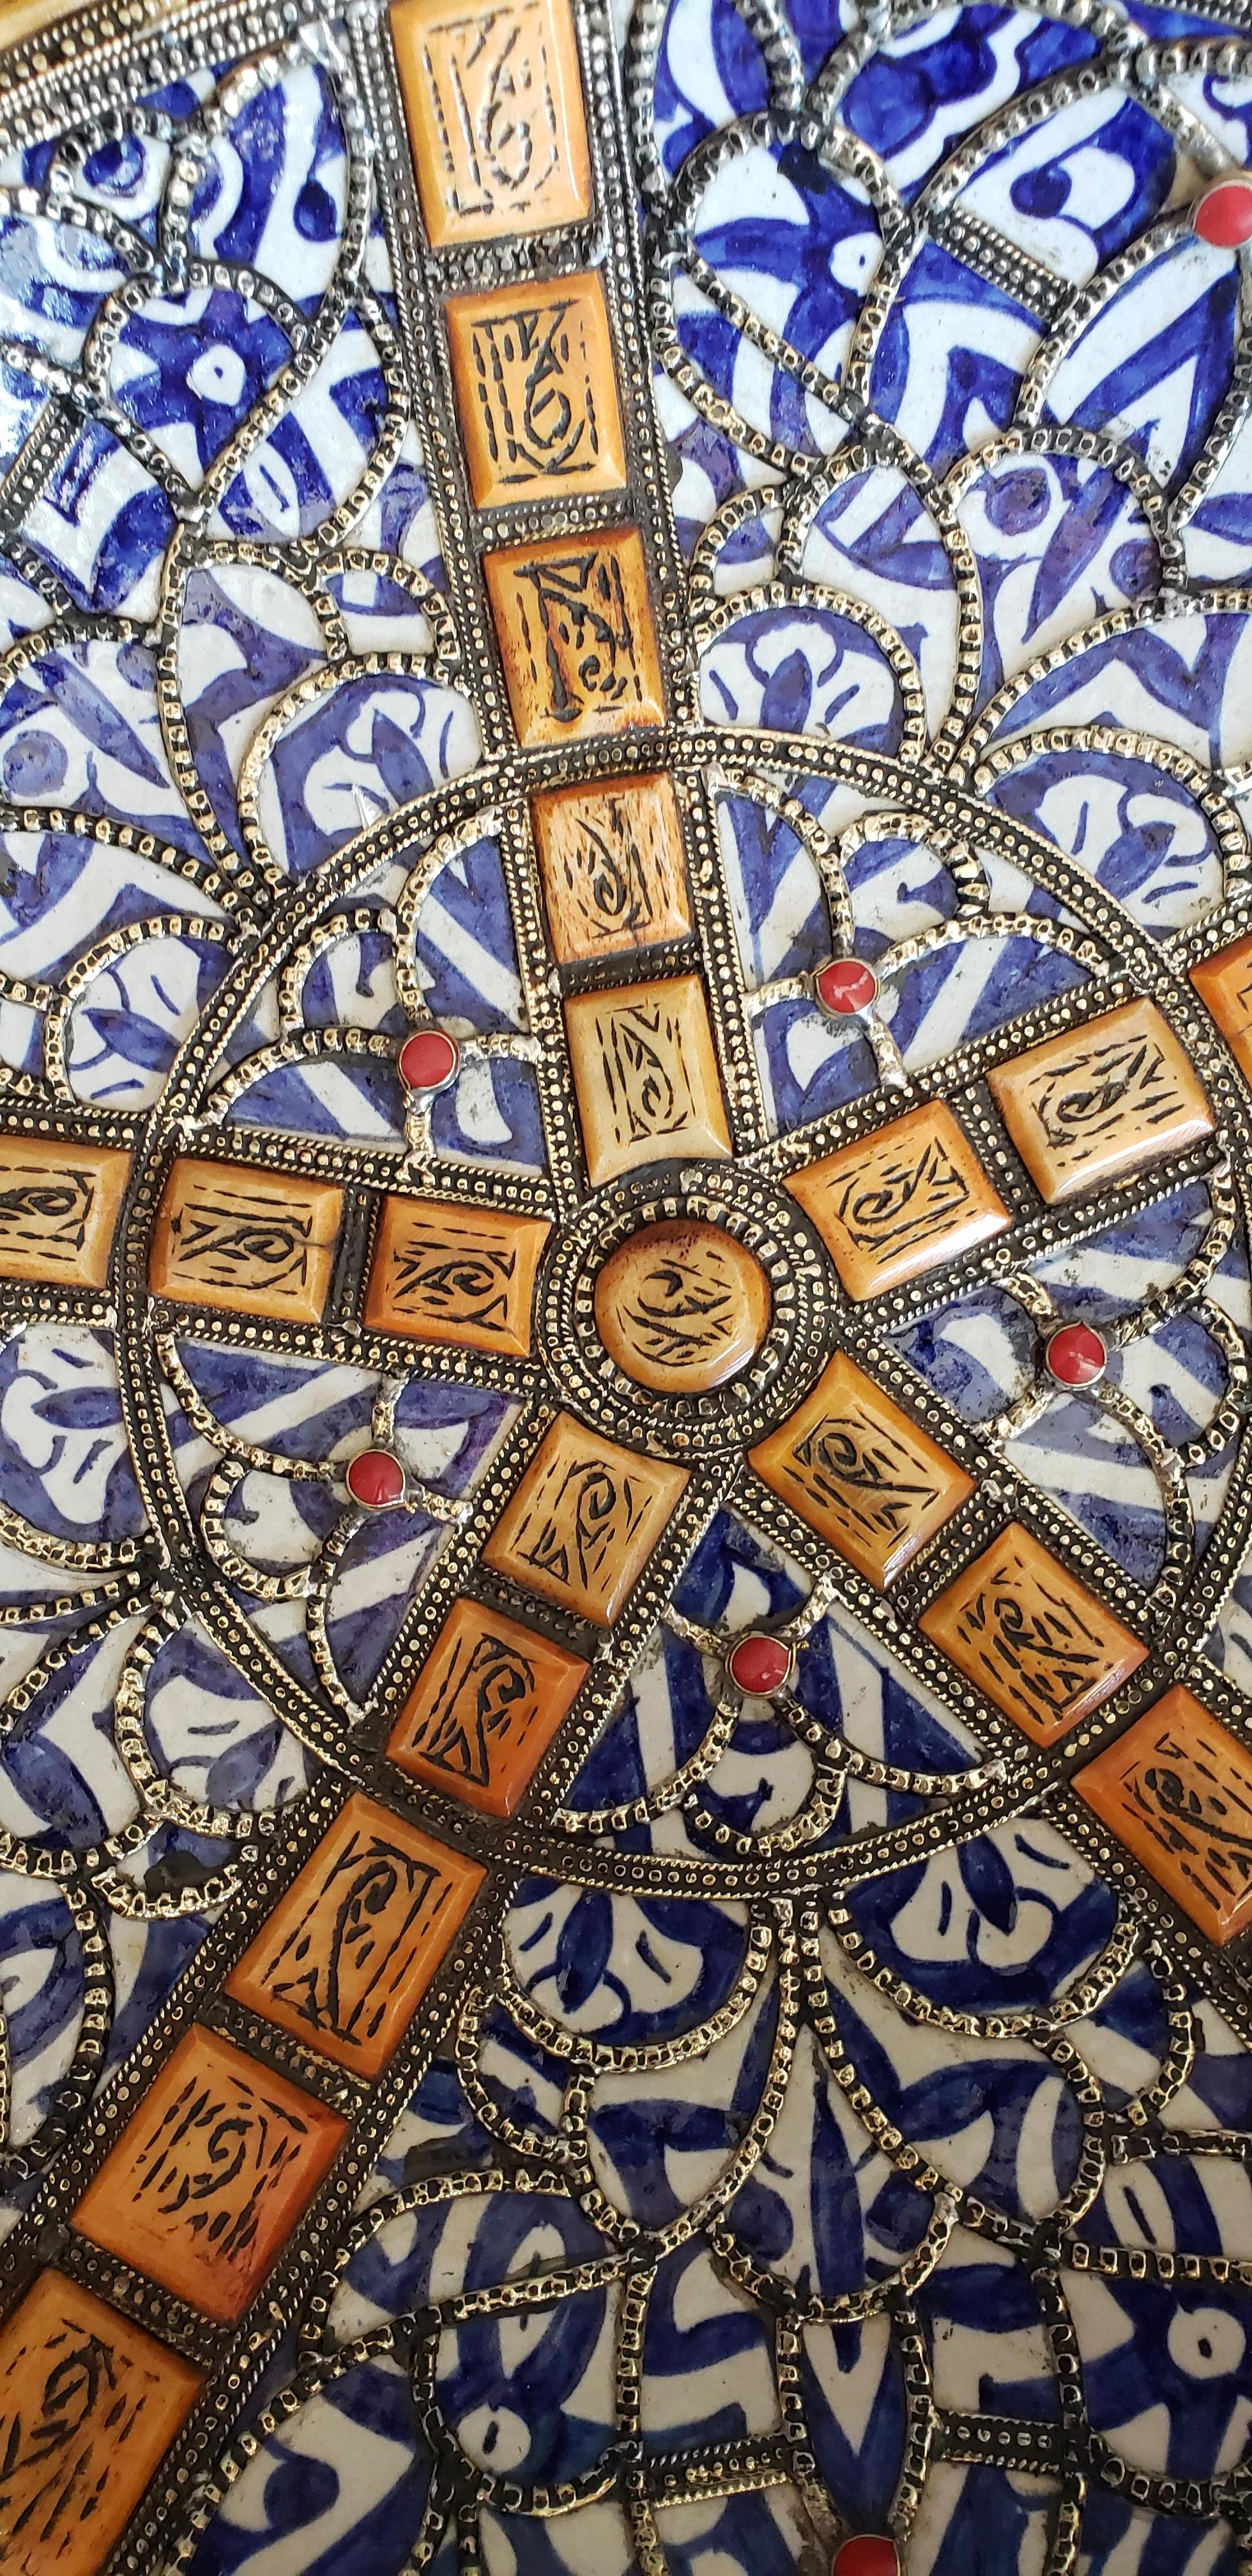 A rare or one of a kind exquisite Moroccan plate / charger for decoration purpose only. This plate is hand painted in blue and white and inlaid with metal. Henna dyed Camel bone fragments throughout. This plate would be a great add-on to any décor.